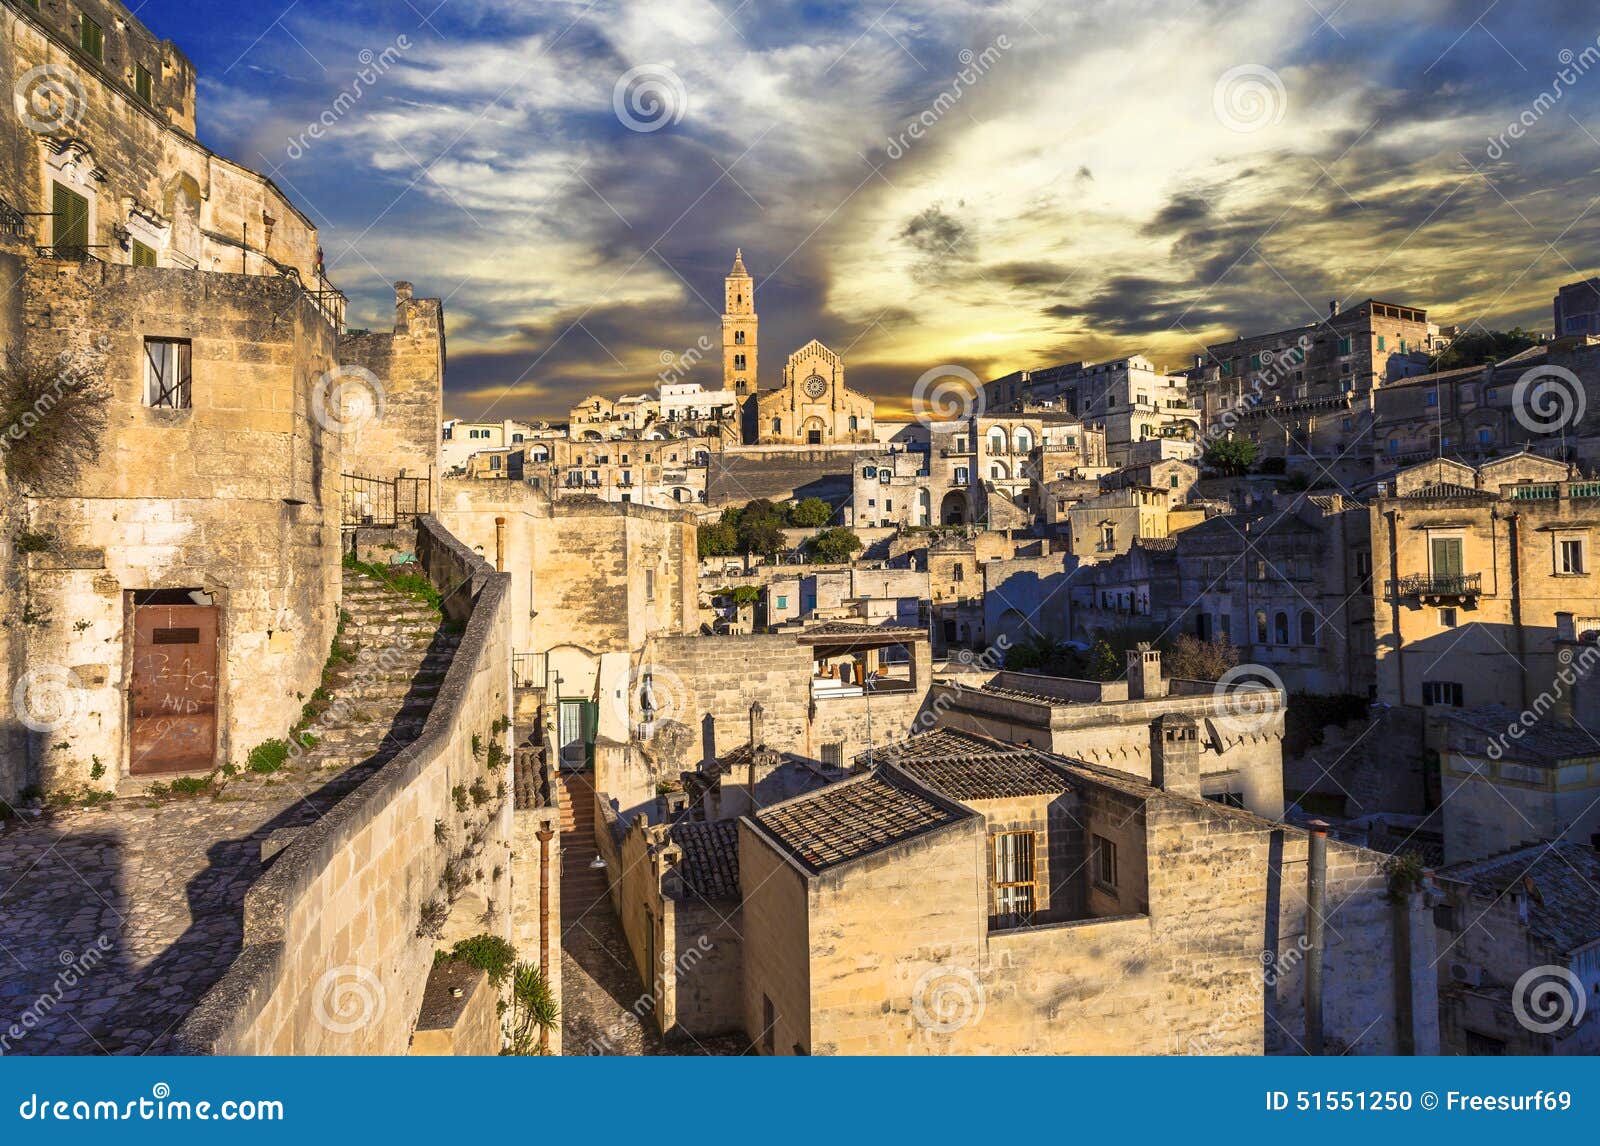 matera over sunset. italy